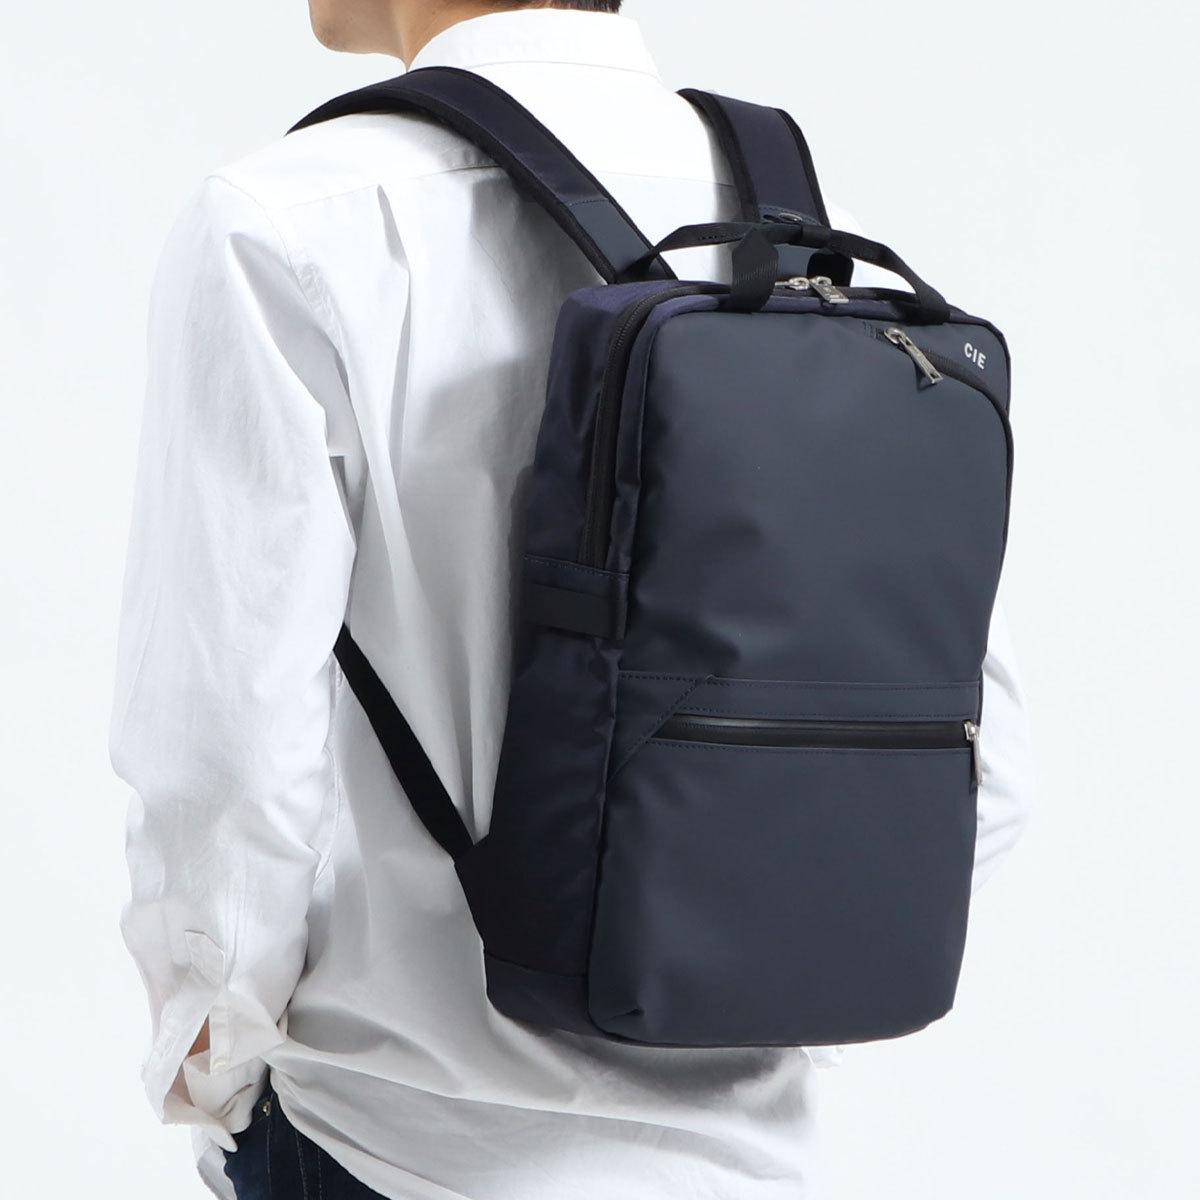 CIE リュック シー VARIOUS 2WAYBACKPACK S リュックサック 通学 防水 